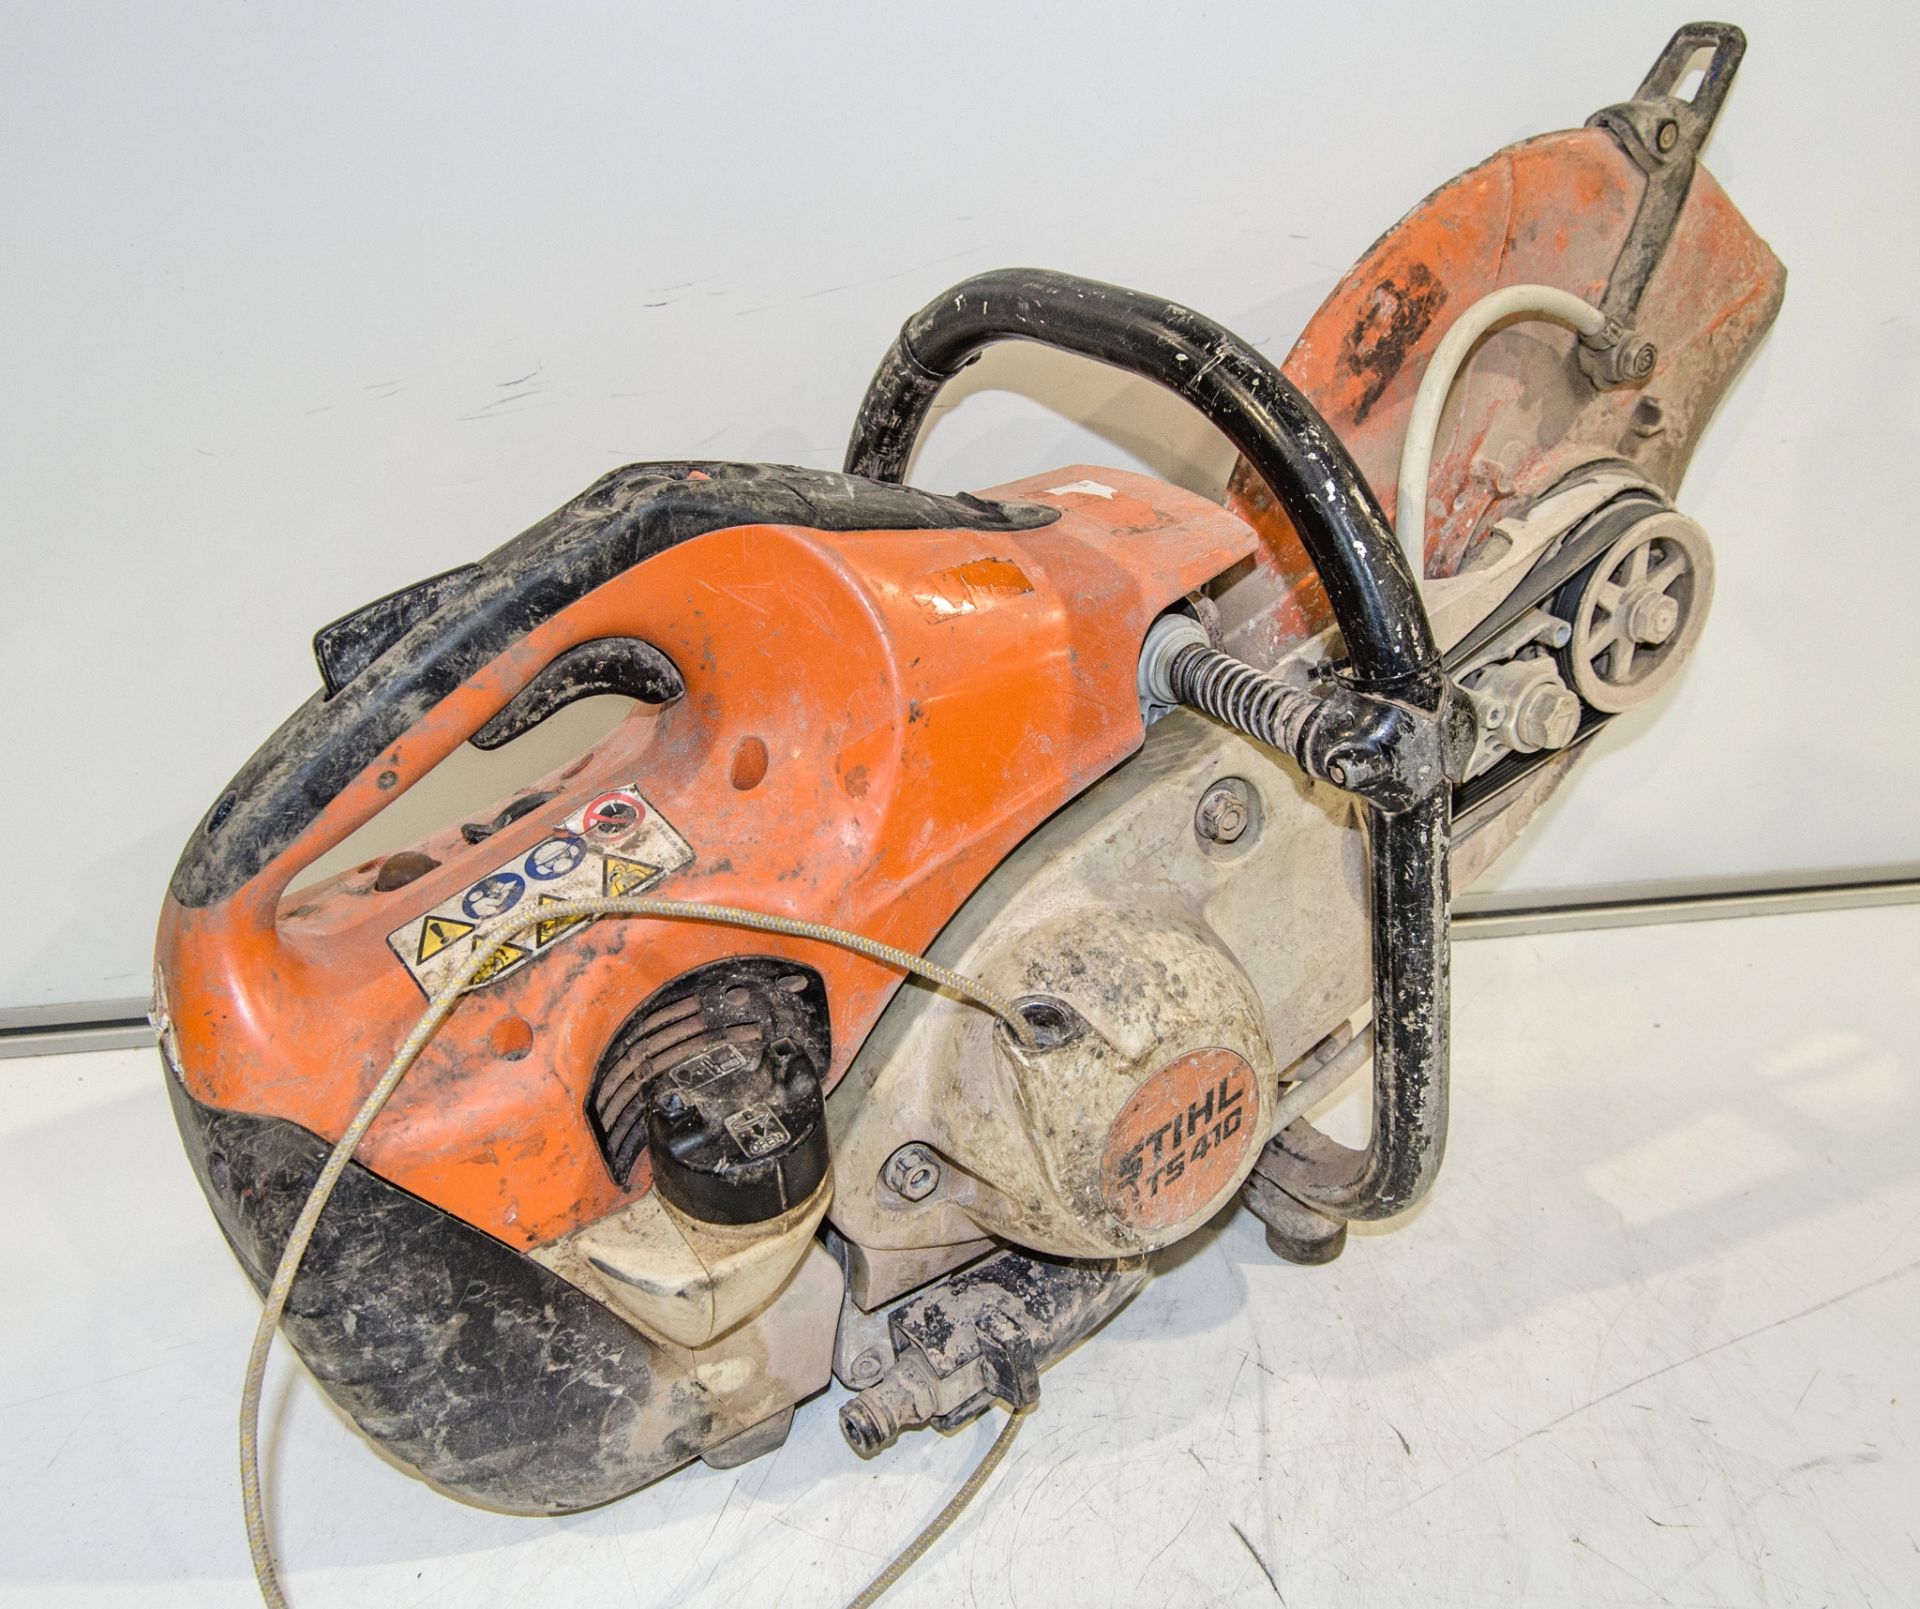 Stihl TS410 petrol driven cut off saw ** Pull cord loose and belt cover missing ** 0227C634 - Image 2 of 2